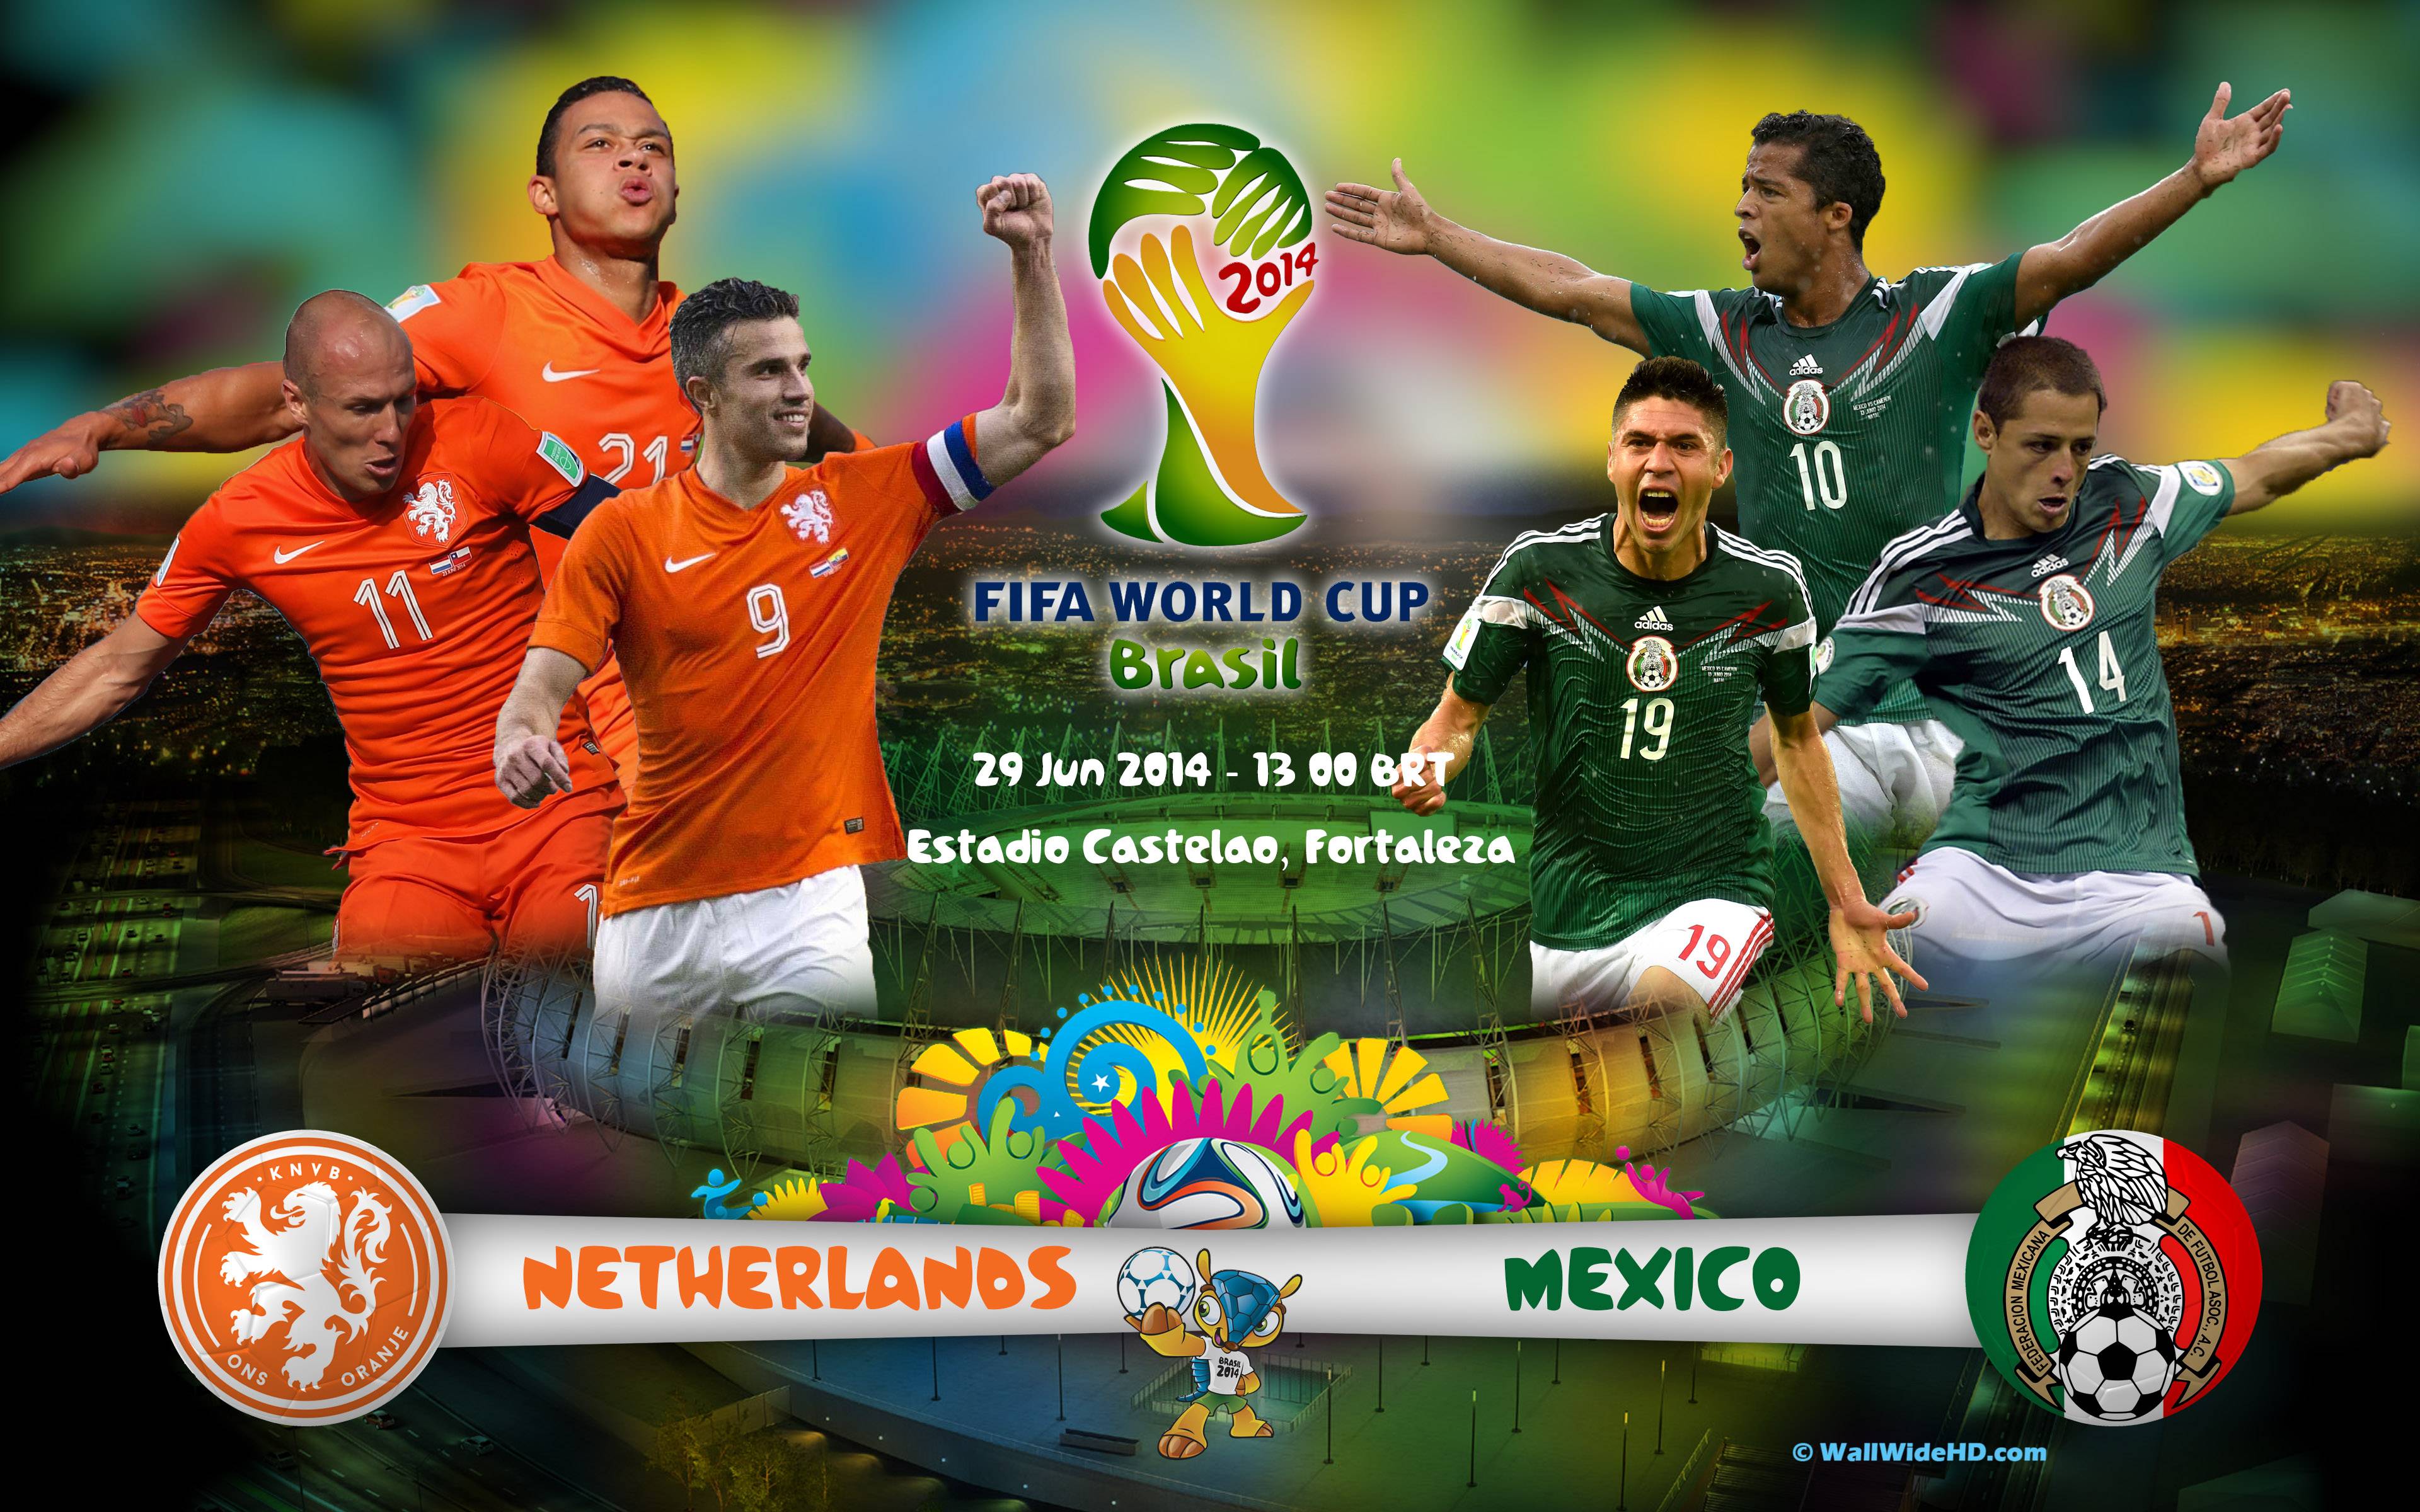 Netherlands vs Mexico World Cup 2014 Round Of 16 Football